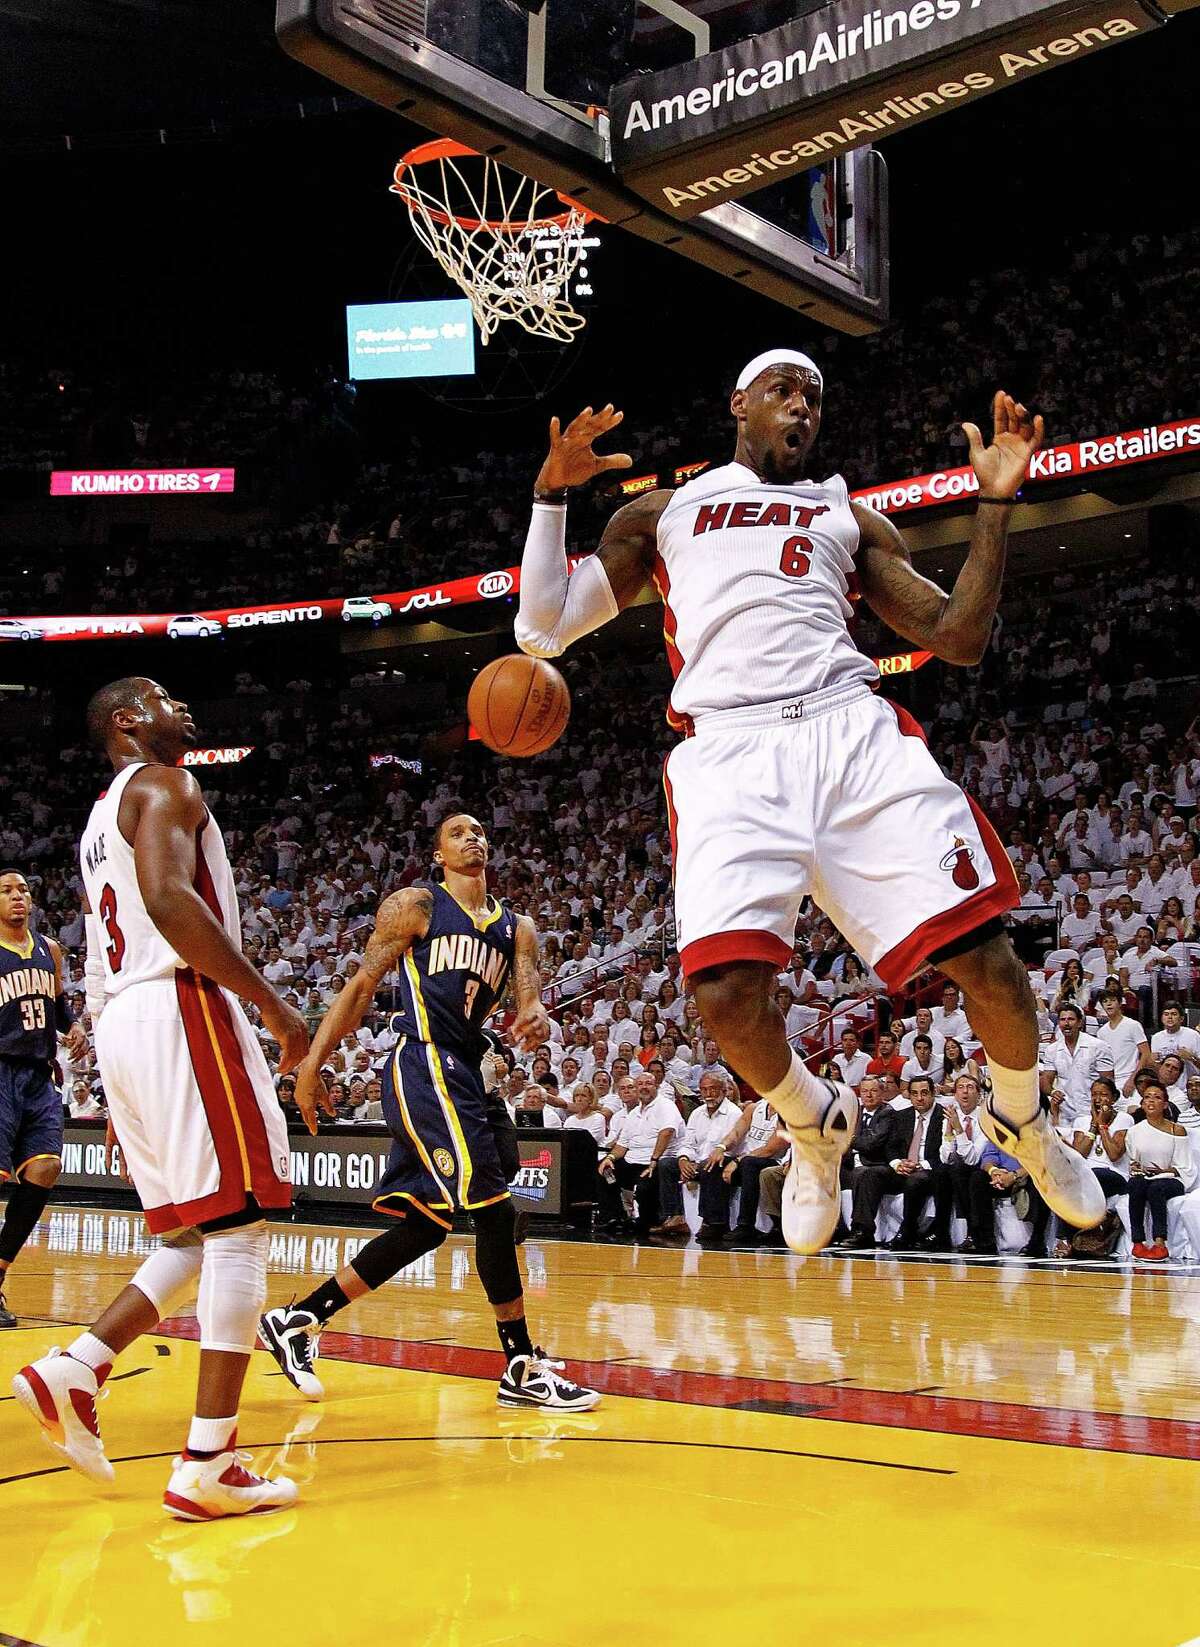 LeBron James #6 of the Miami Heat dunks during Game Five of the Eastern Conference Semifinals in the 2012 NBA Playoffs against the Indiana Pacers at AmericanAirlines Arena on May 22, 2012 in Miami, Florida.